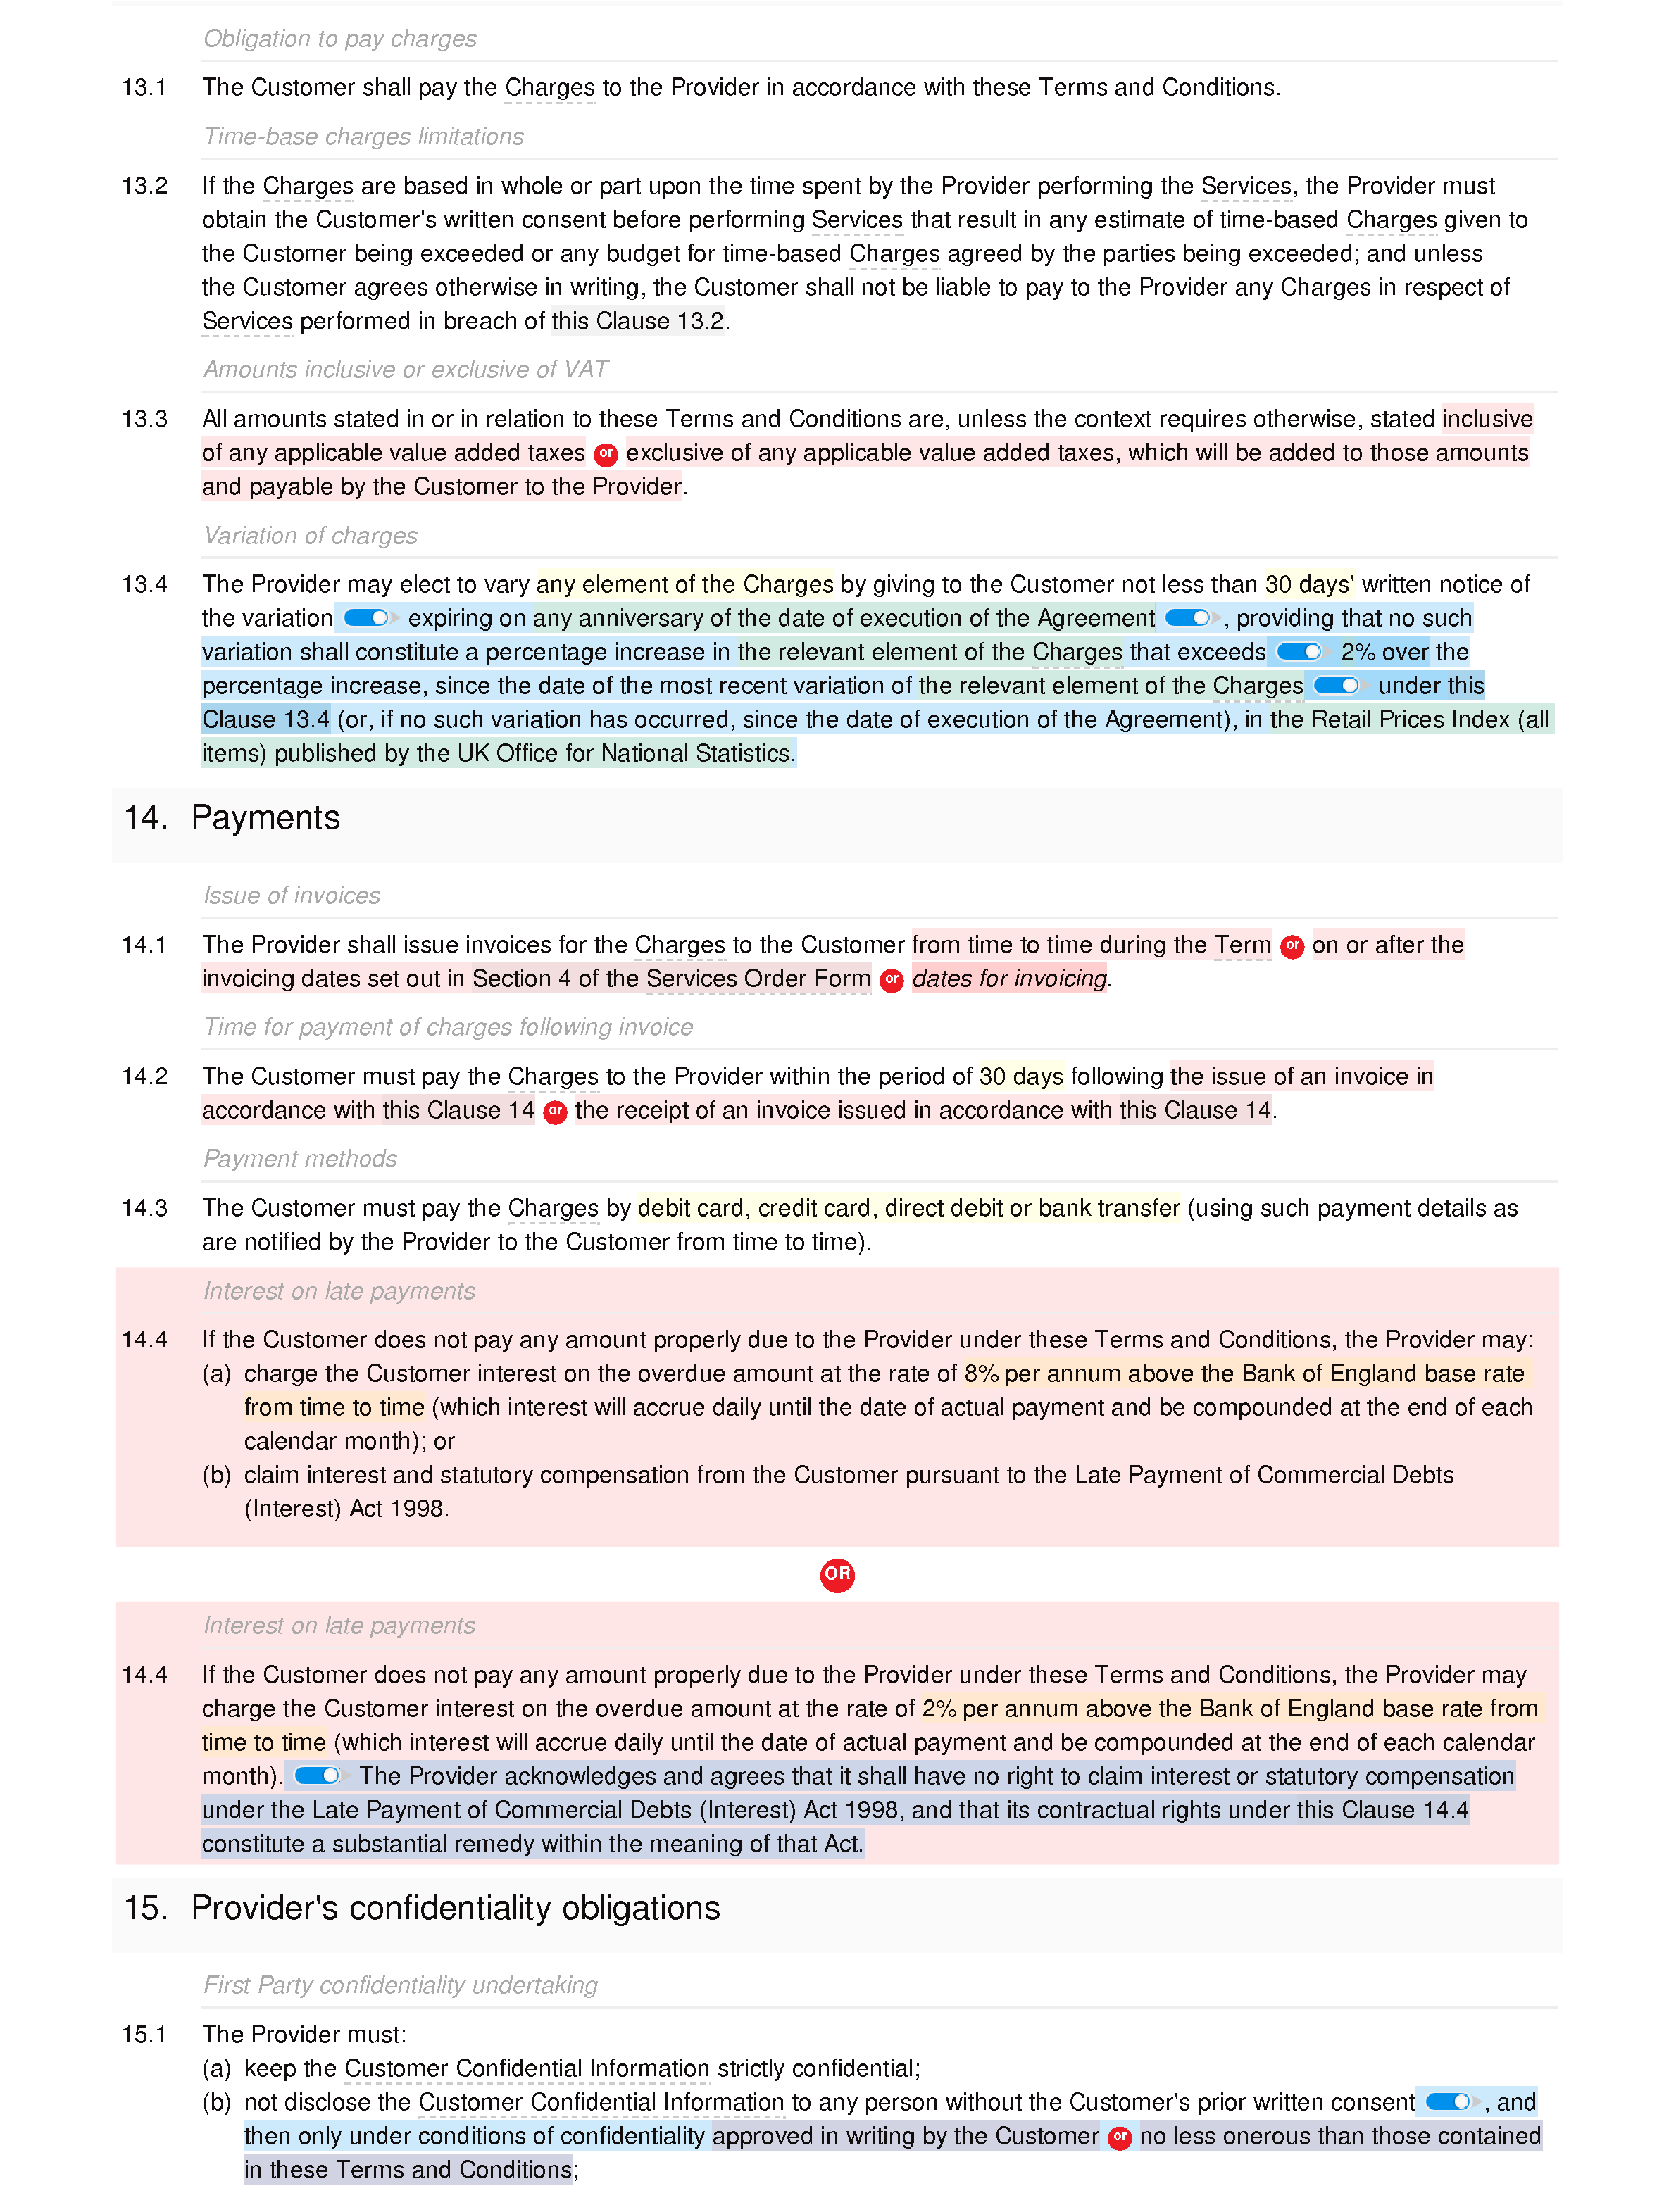 SaaS terms and conditions (standard) document editor preview